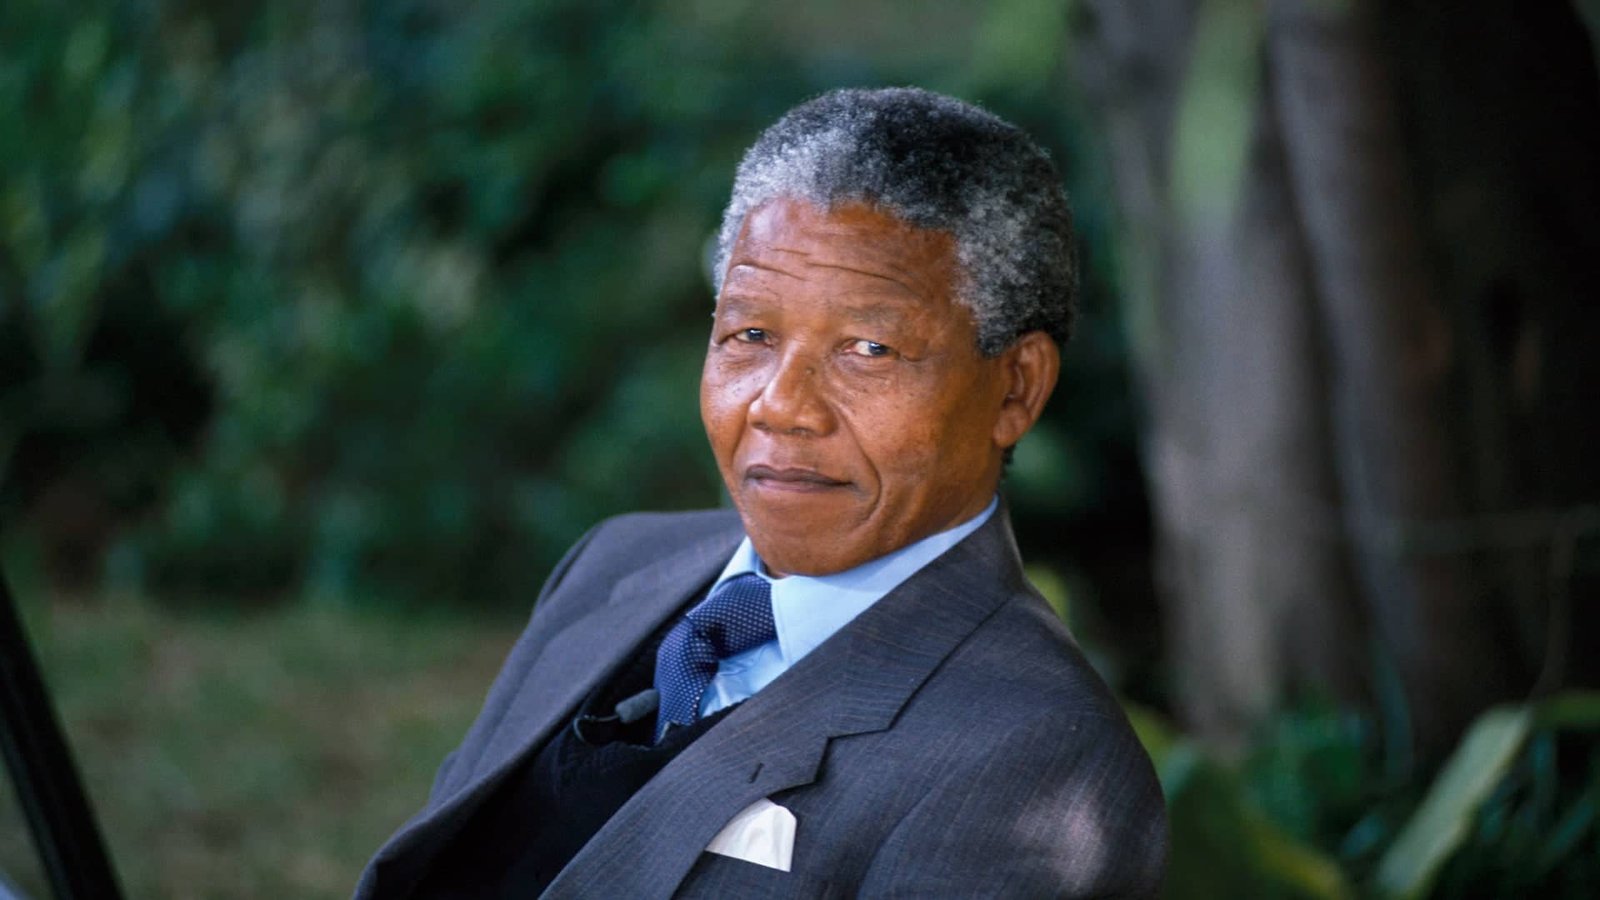 Important Events in the Life of Nelson Mandela